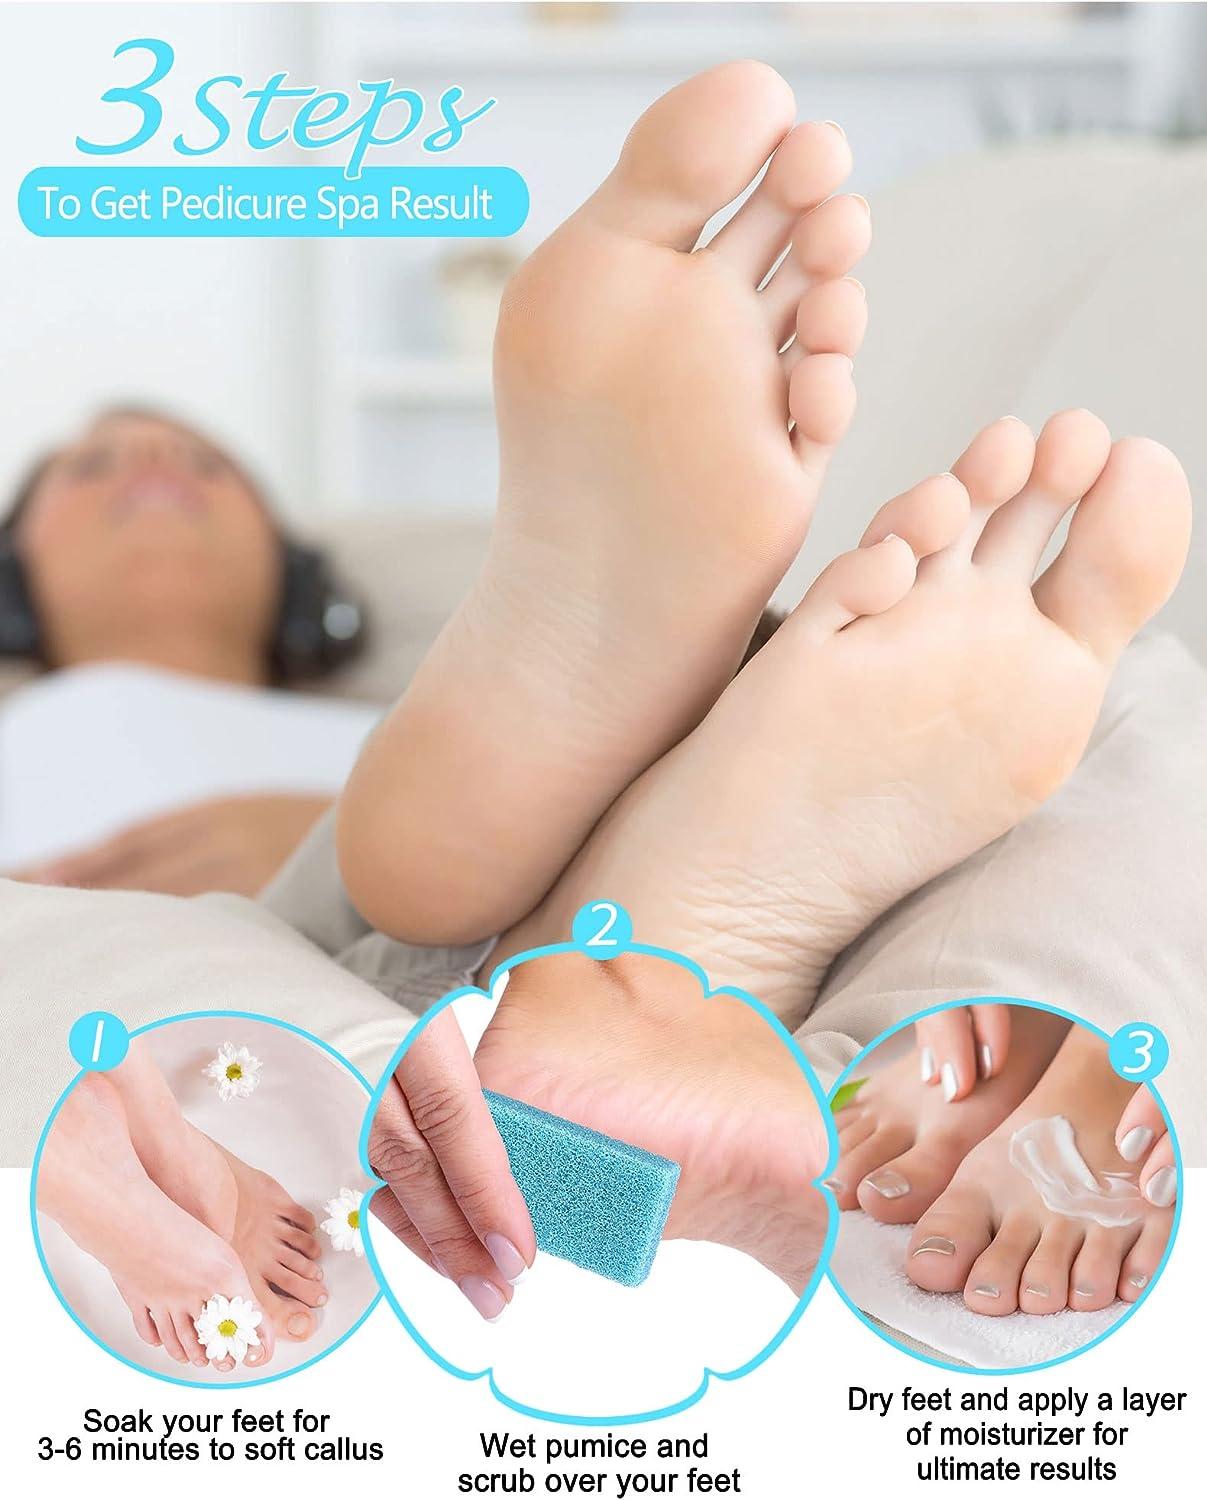 Coarse Blue Pedicure Pumice Stone For Feet - Disposable Foot